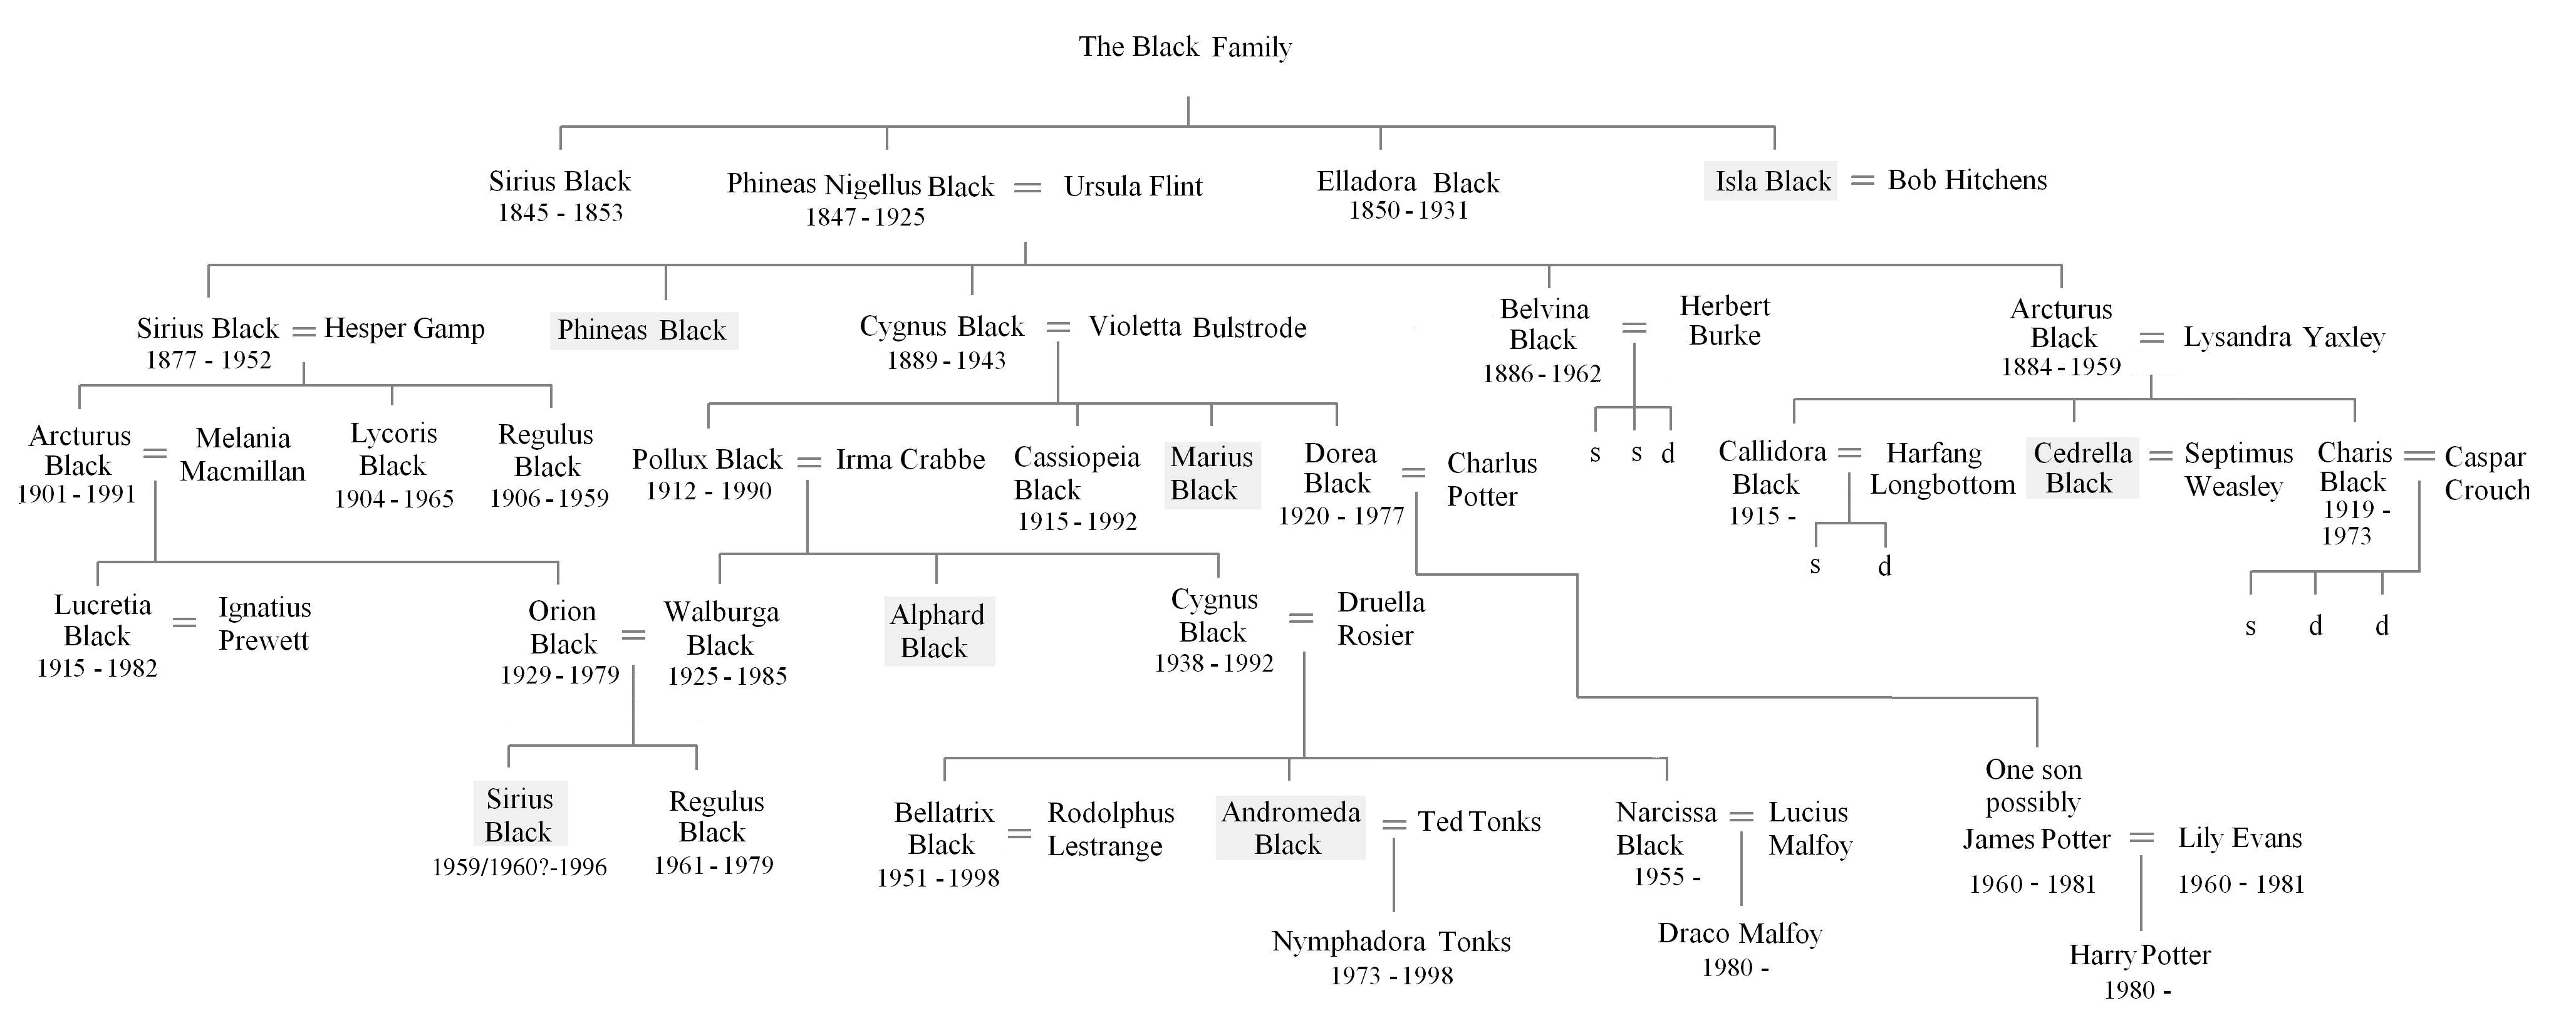 http://images3.wikia.nocookie.net/harrypotter/images/8/83/Black_Family_Tree.png